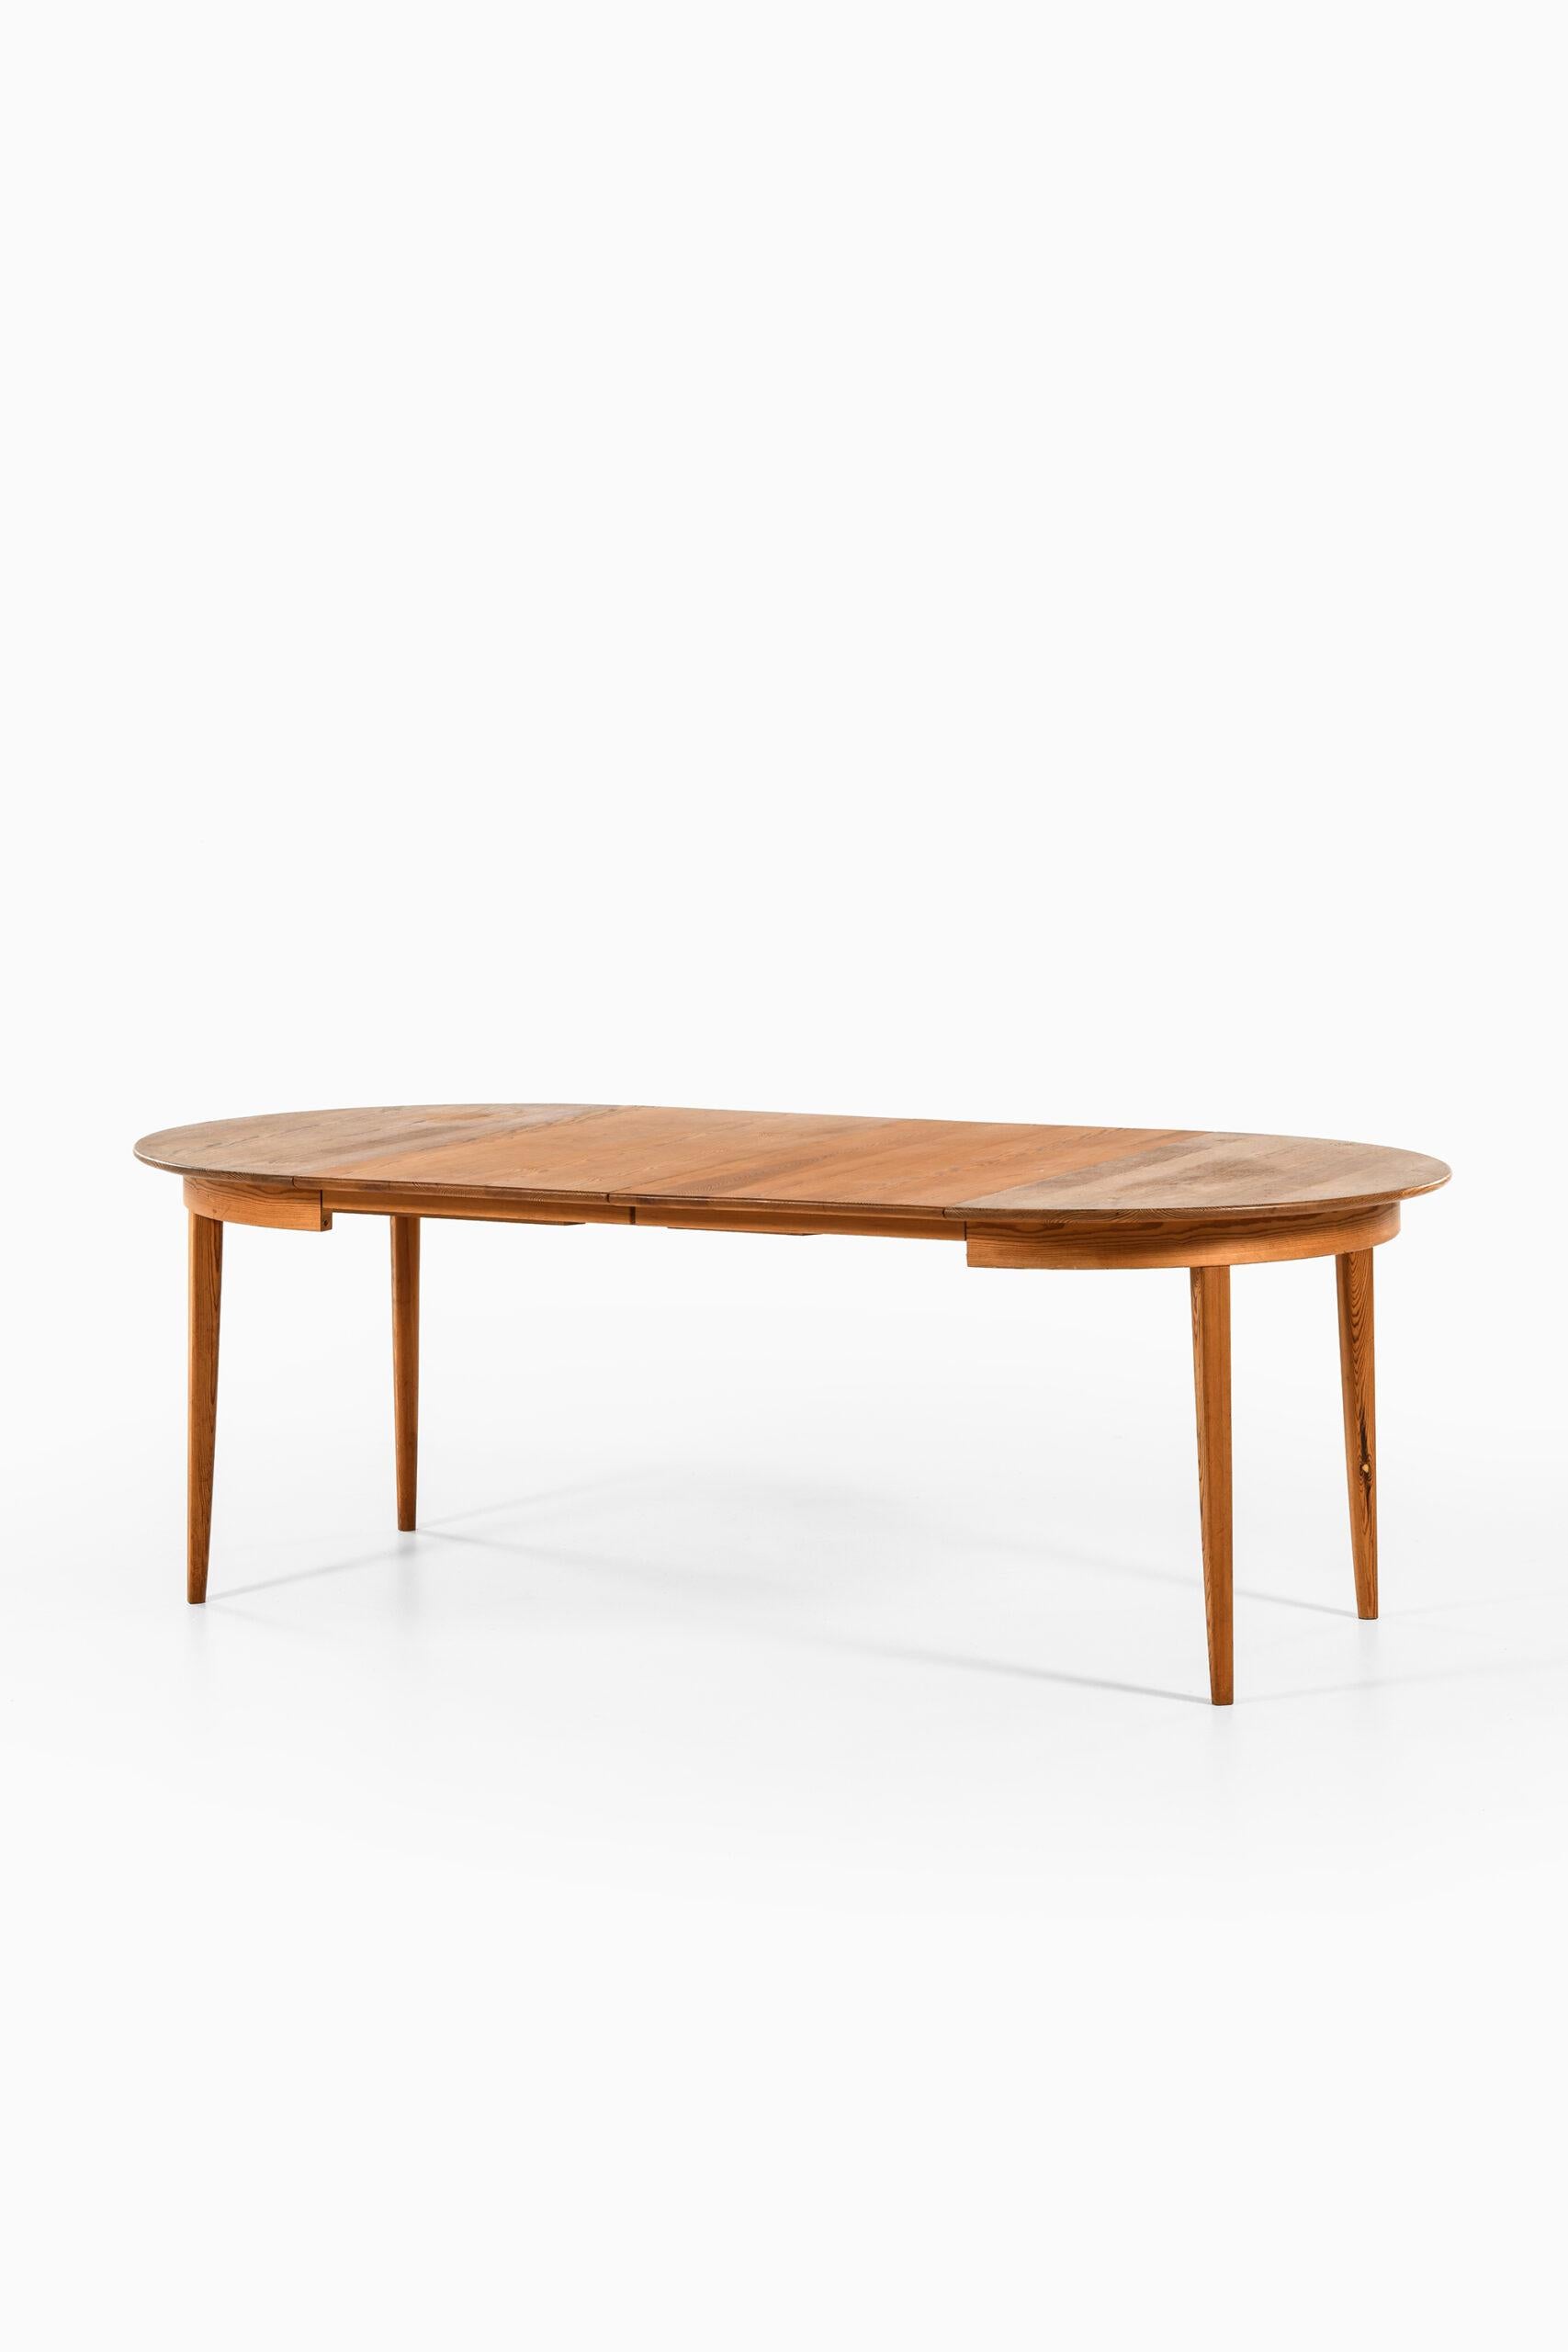 Mid-20th Century Carl Malmsten Dining Table Produced in Sweden